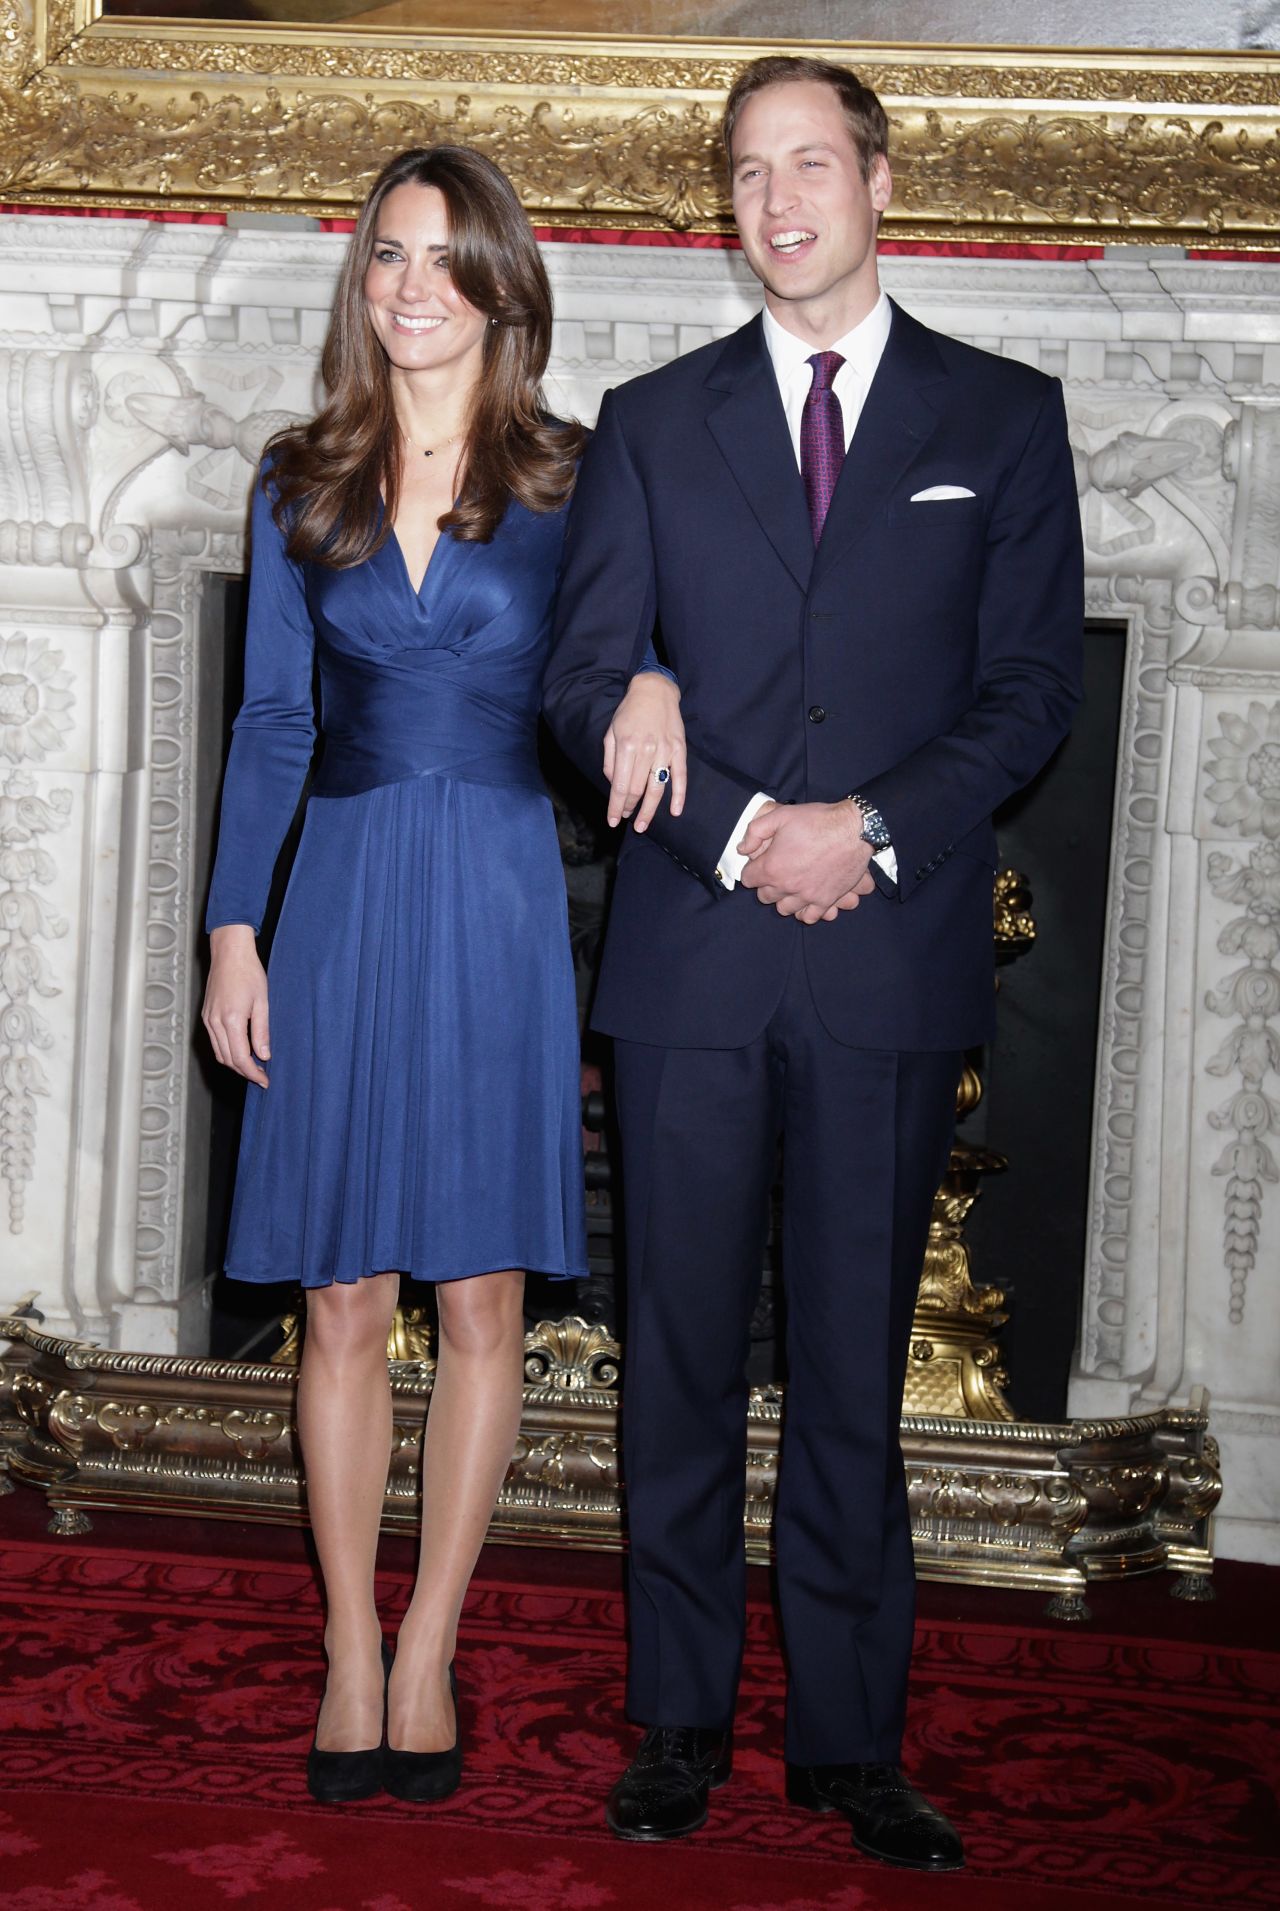 Princess Catherine Fast Facts |